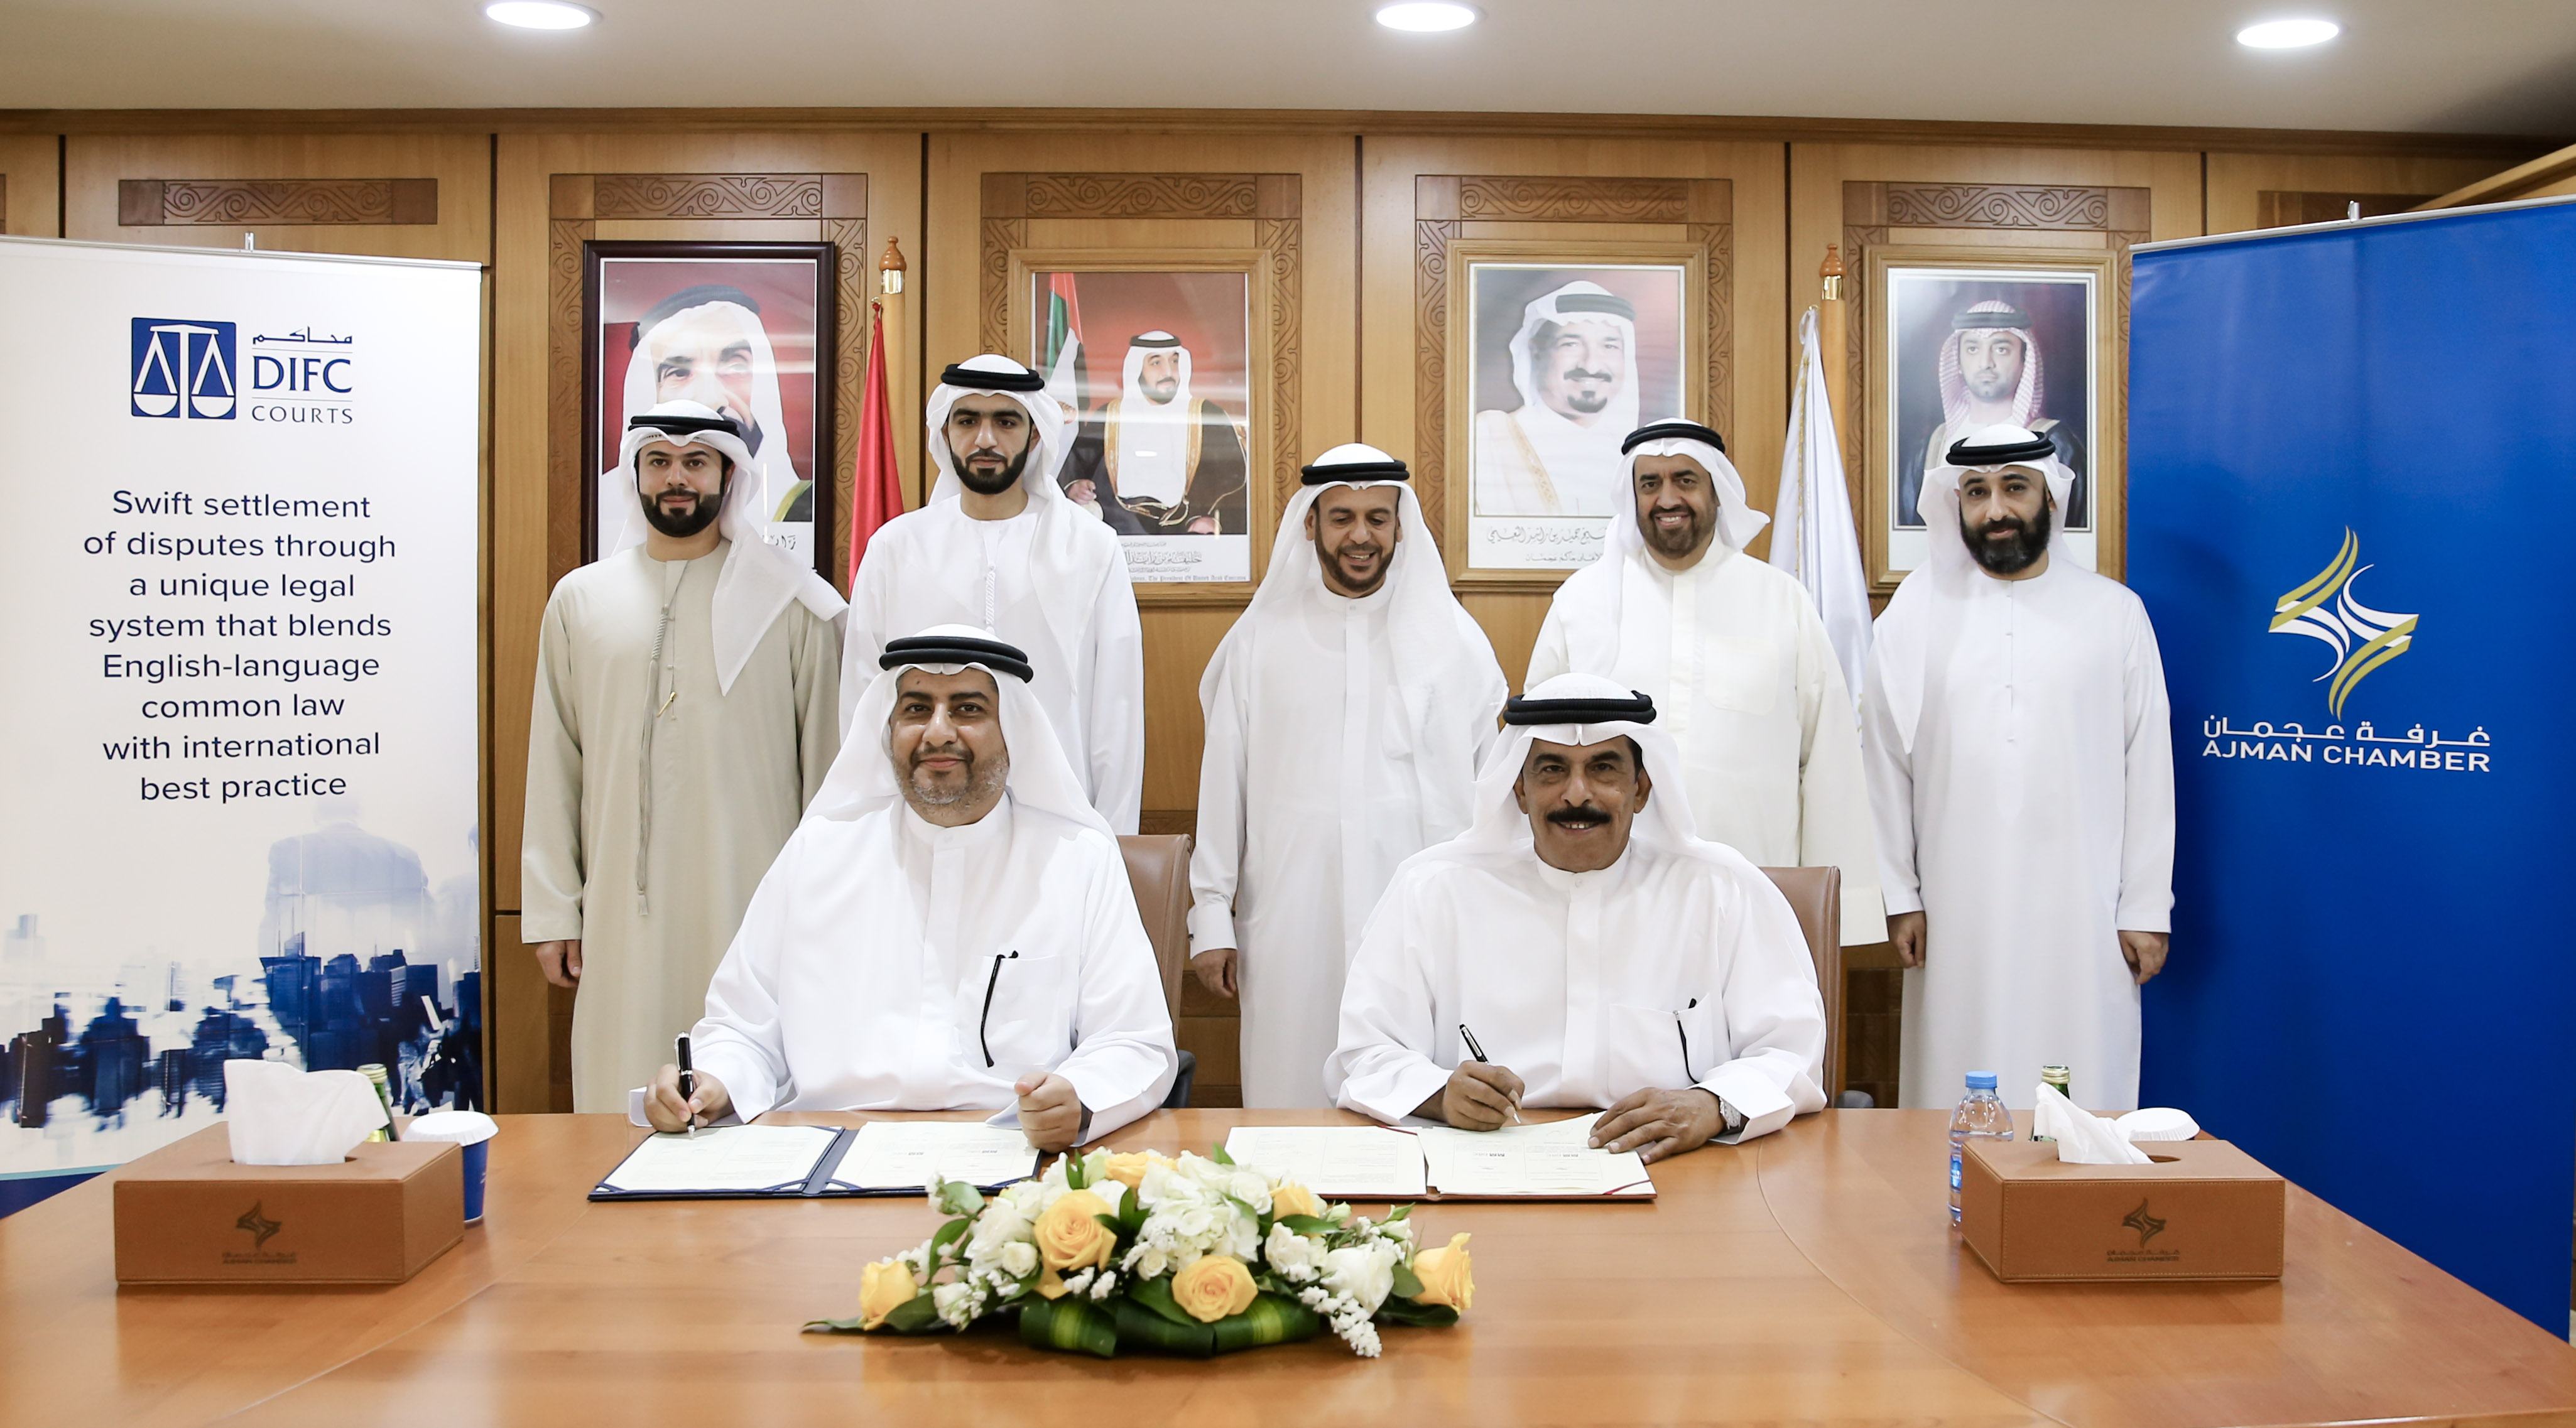 Ajman Chamber of Commerce and Industry signs MoU with DIFC Courts to enhance mutual cooperation and knowledge exchange